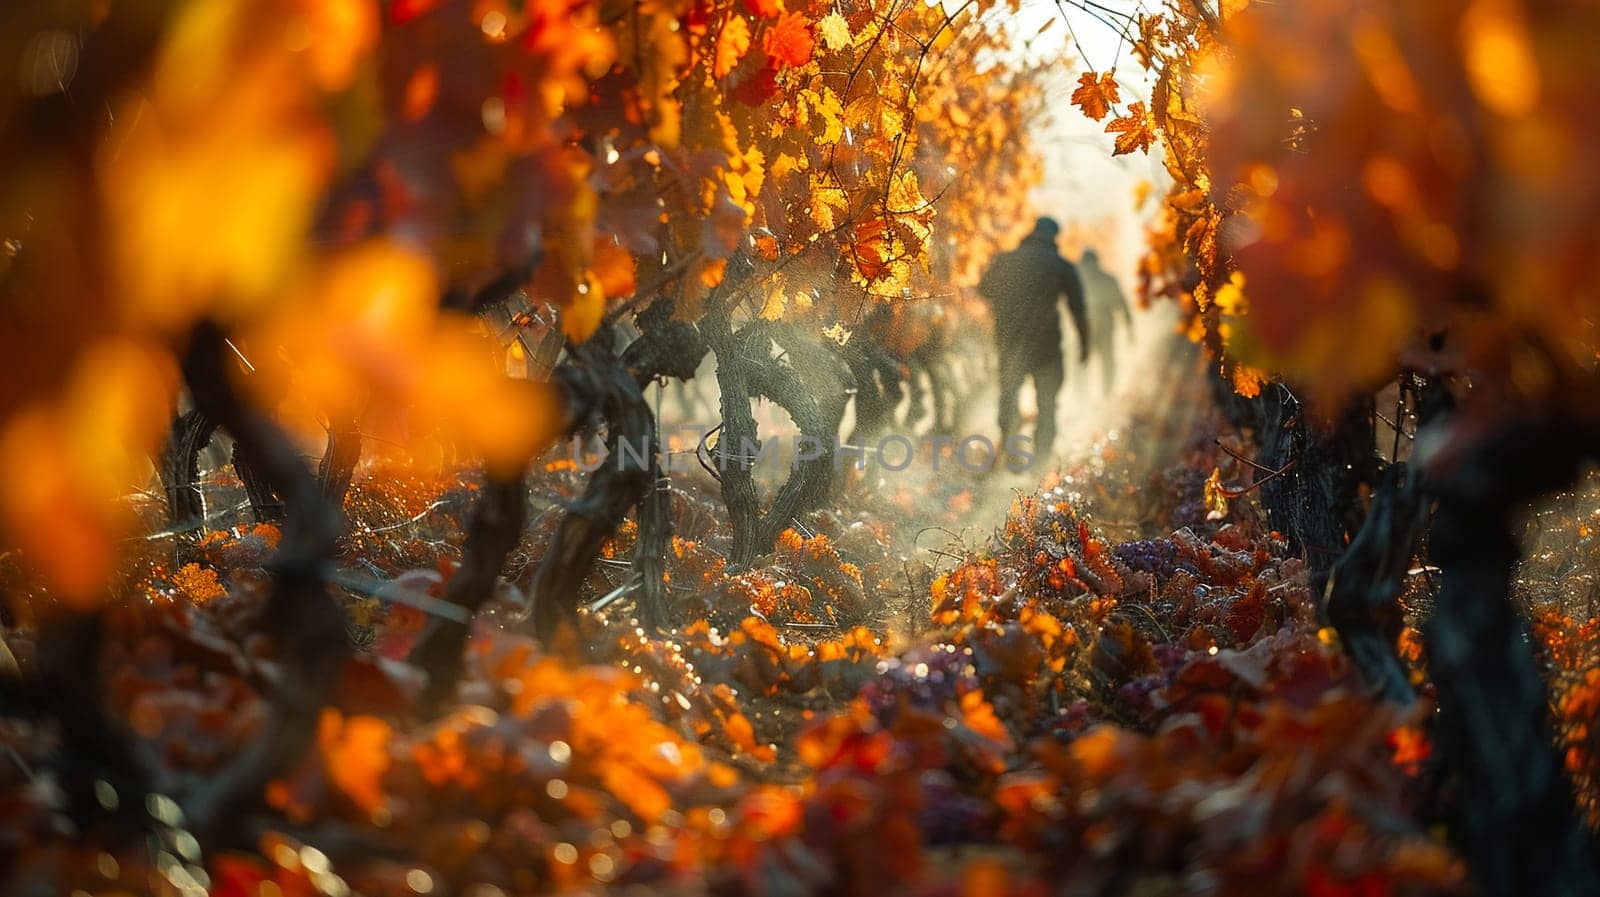 Sprawling Vineyard at Harvest Time with Workers in the Fields by Benzoix